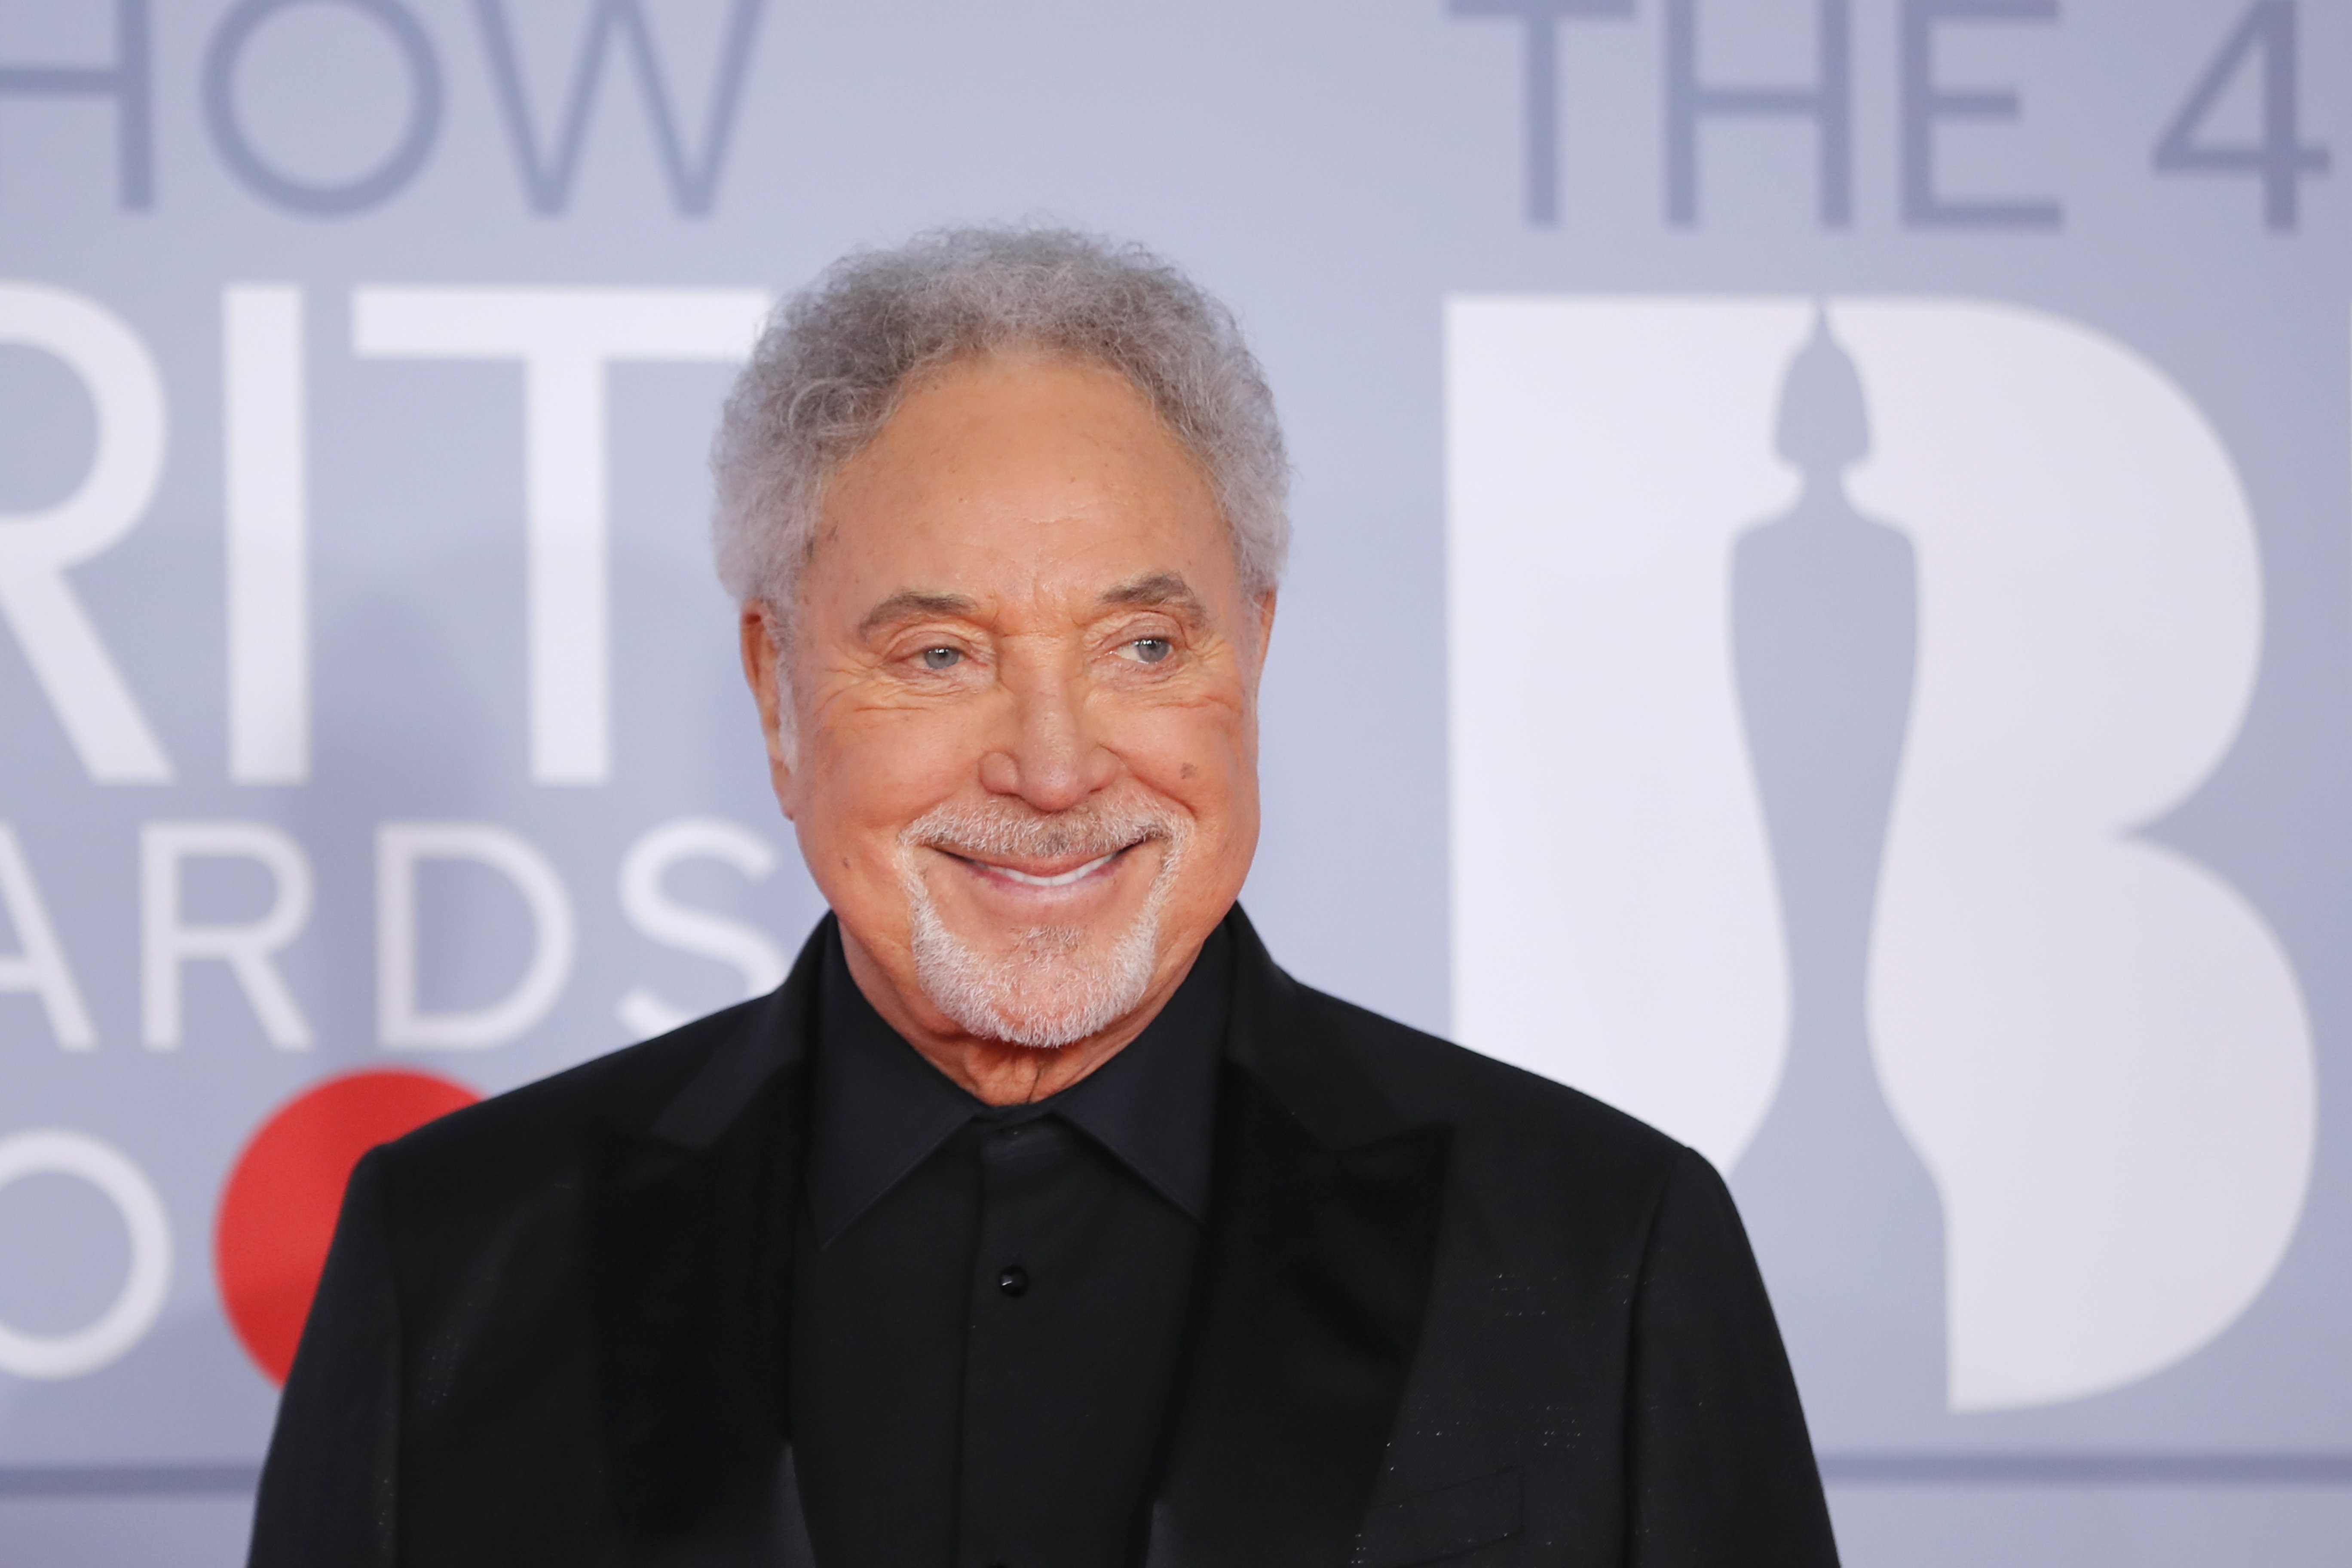 British singer Tom Jones poses on the red carpet on arrival for the BRIT Awards 2020 in London on February 18, 2020 | Source: Getty Images